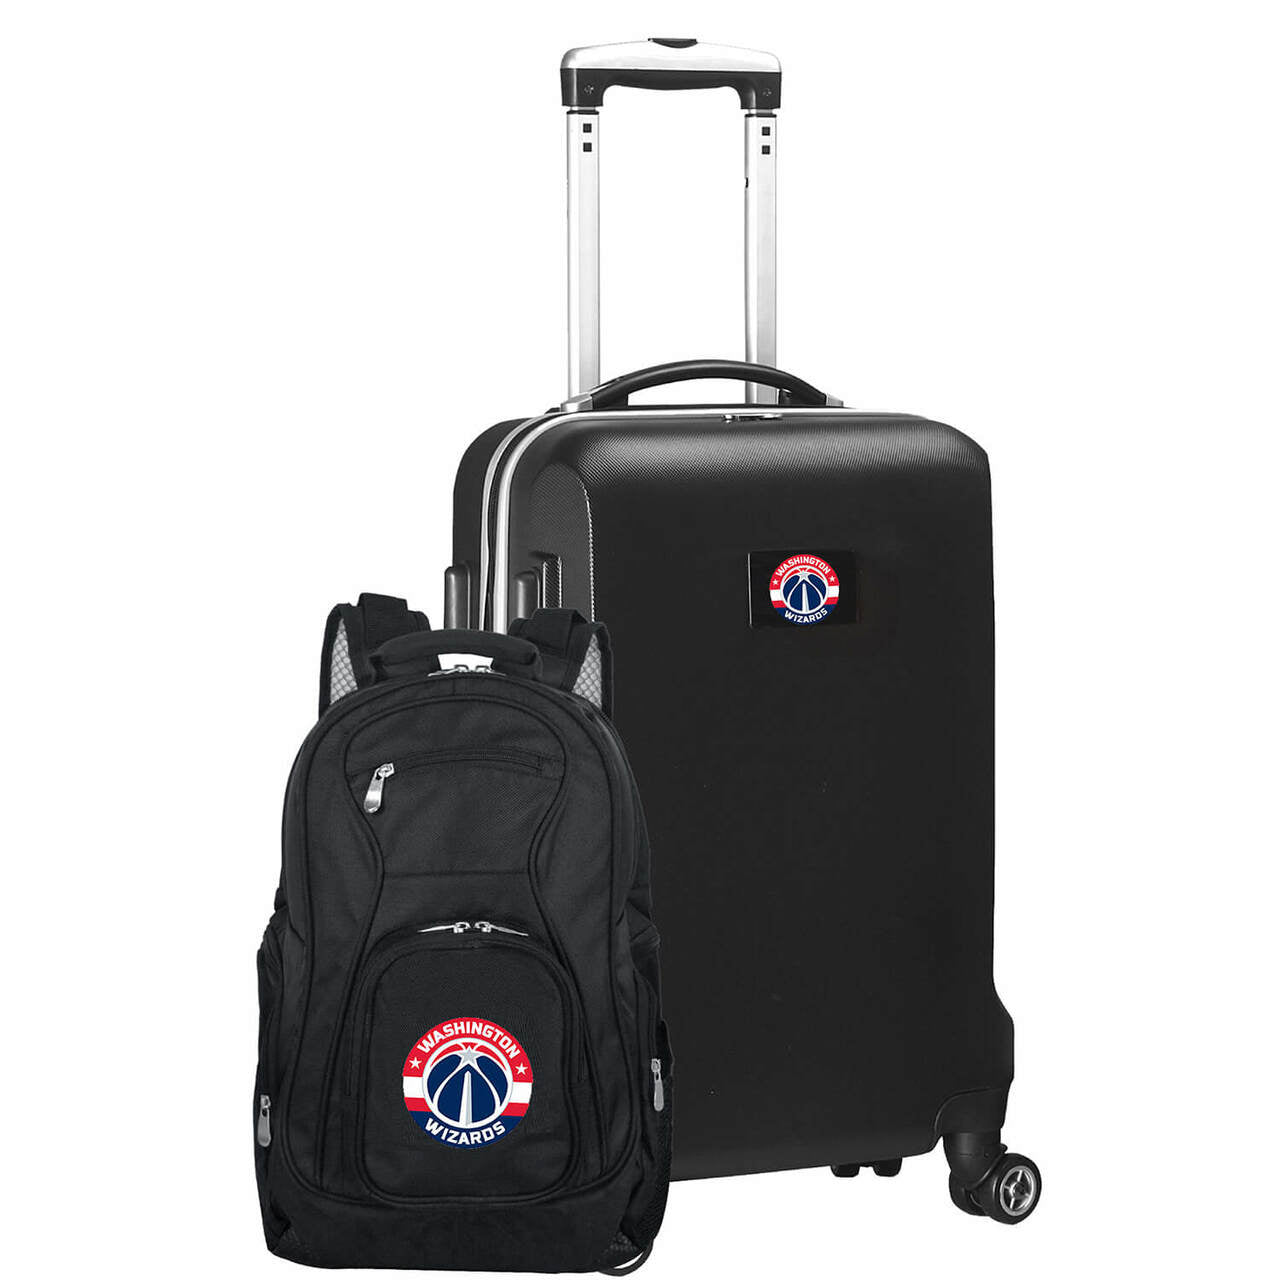 Washington Wizards Deluxe 2-Piece Backpack and Carry on Set in Black